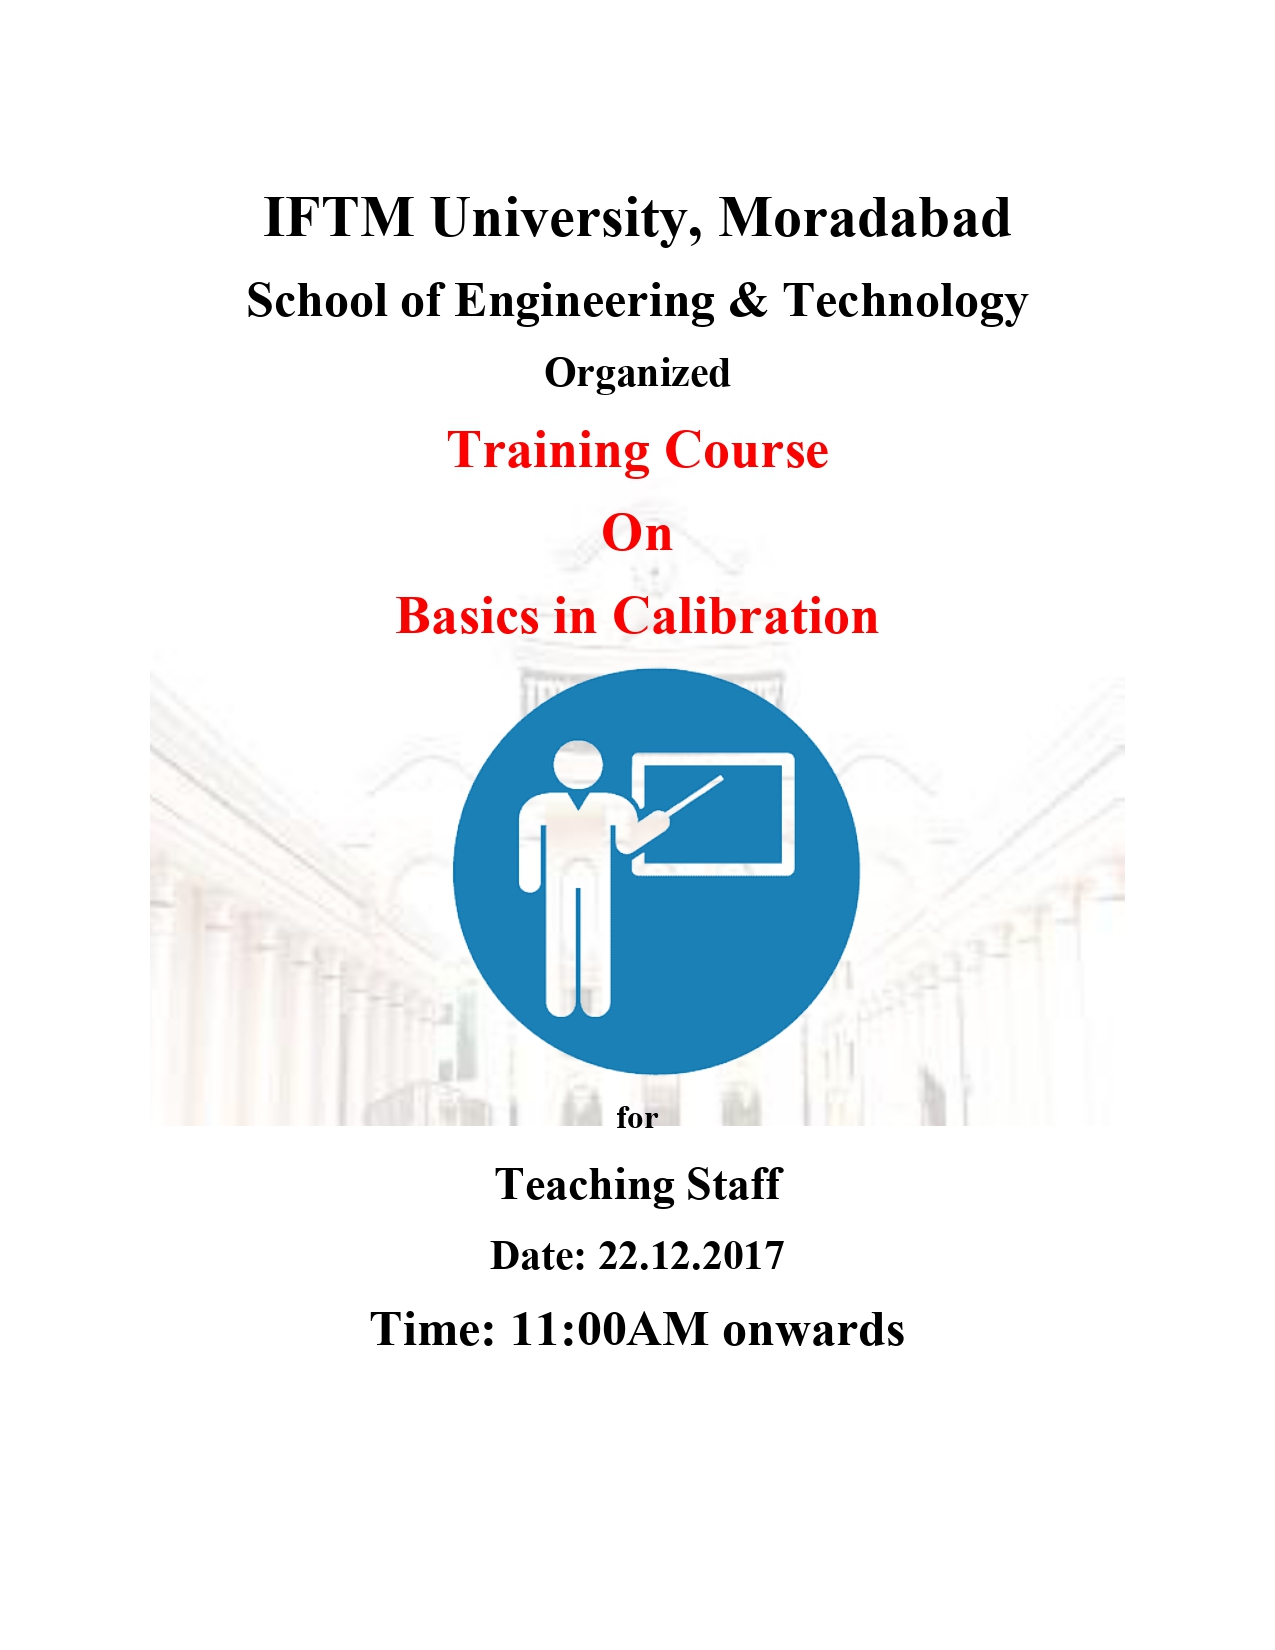 A Training programme on Course Basics in Calibration for Teaching Staff